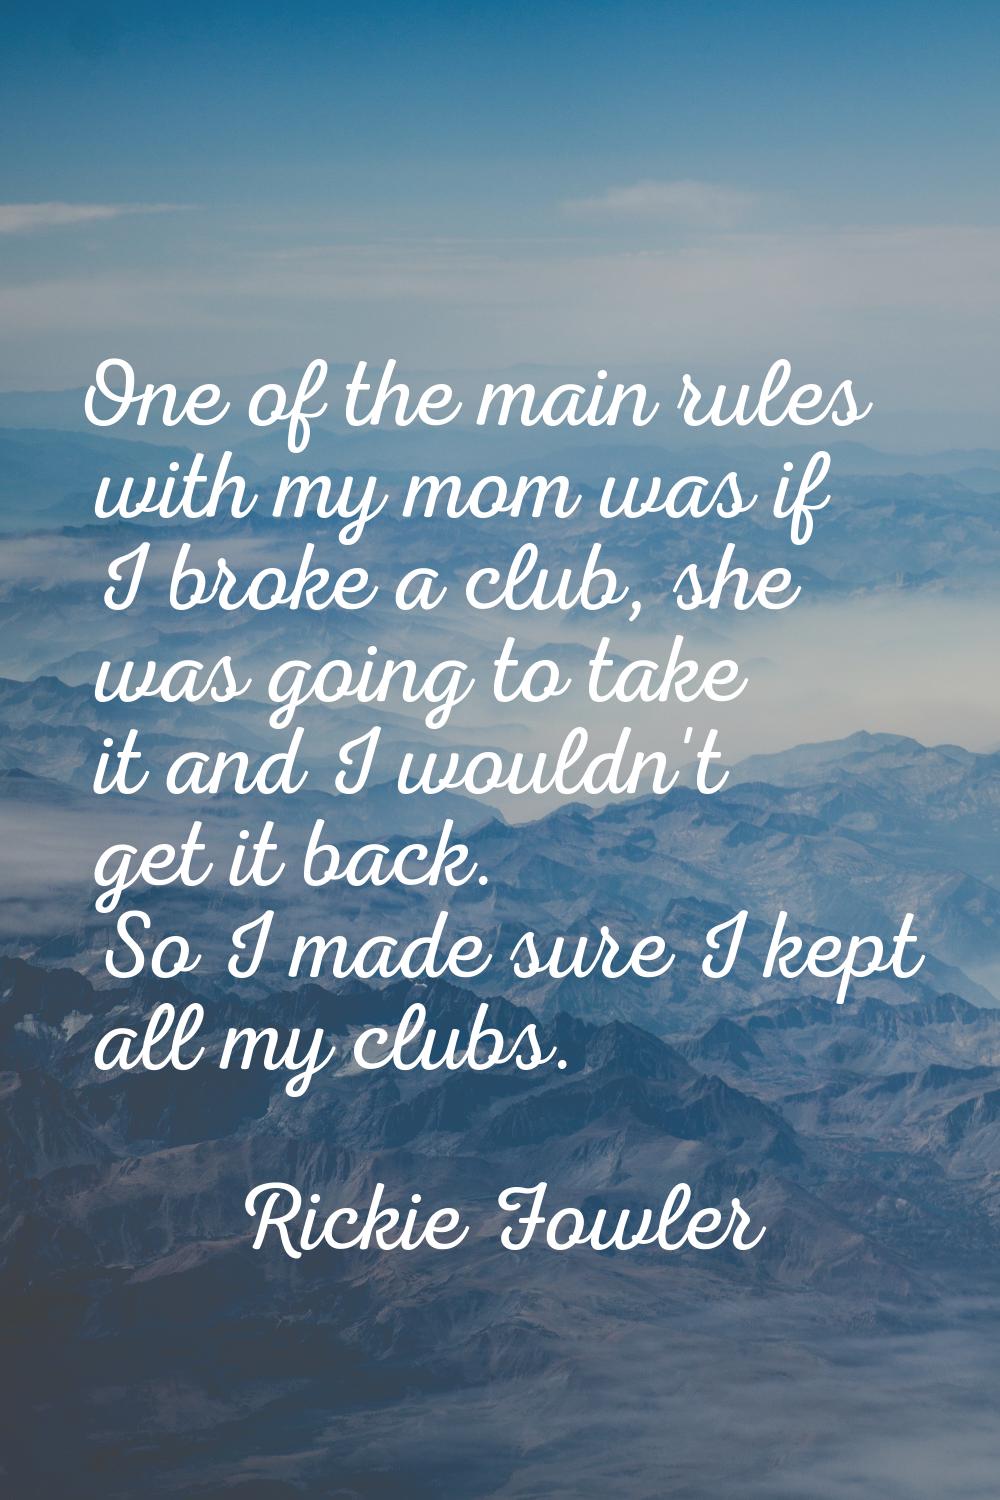 One of the main rules with my mom was if I broke a club, she was going to take it and I wouldn't ge